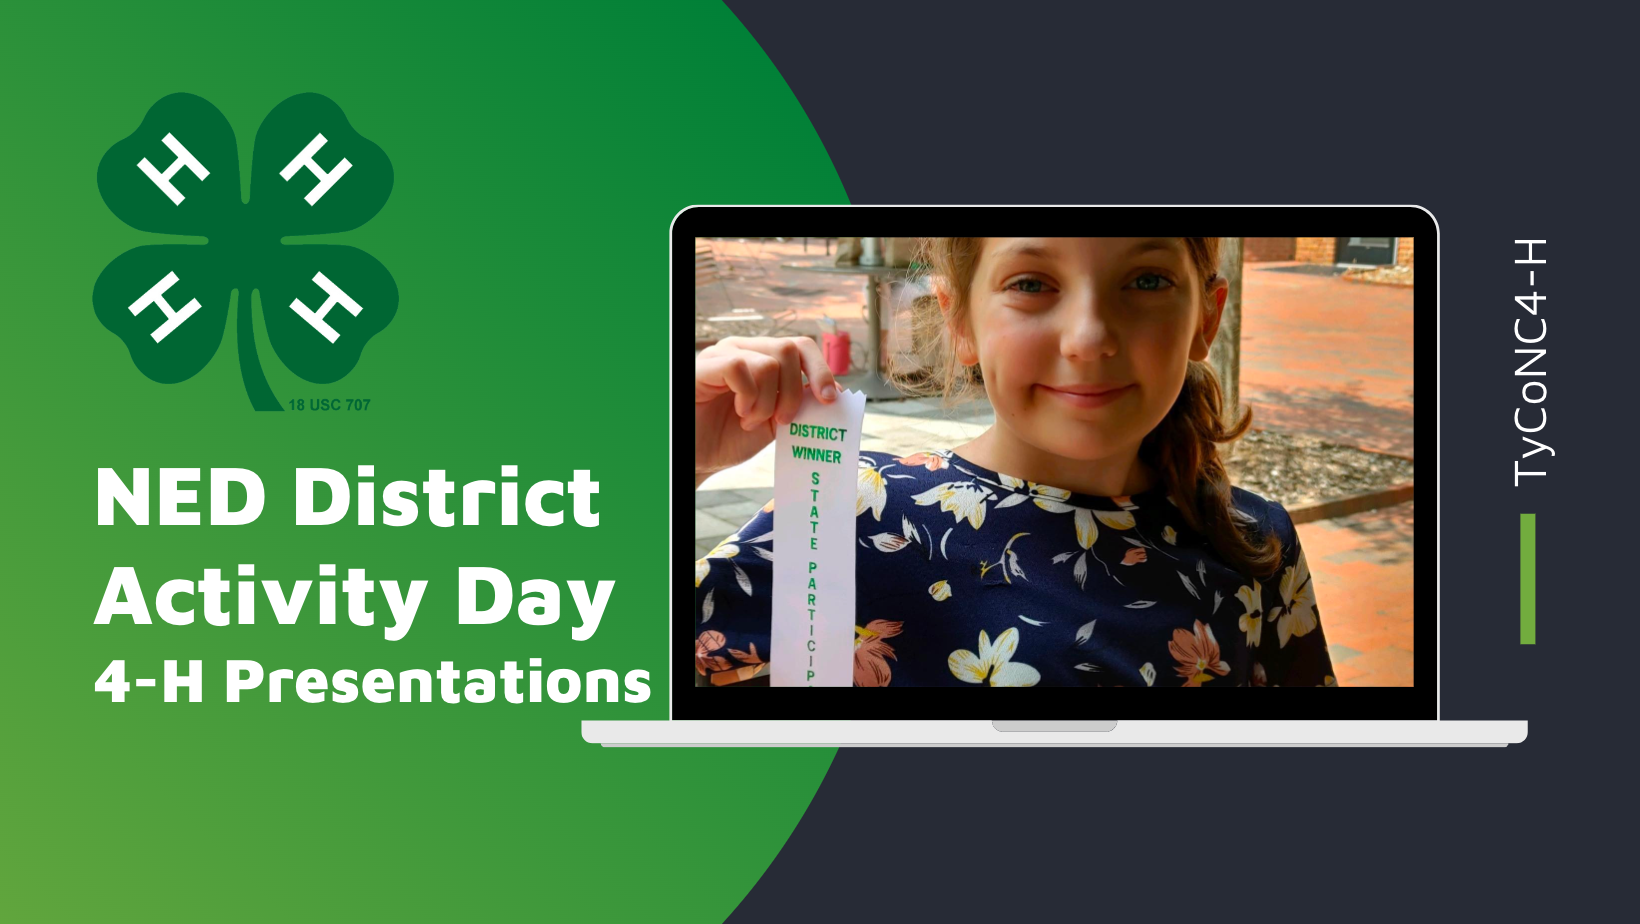 NED District Activity Day, 4-H Presentations